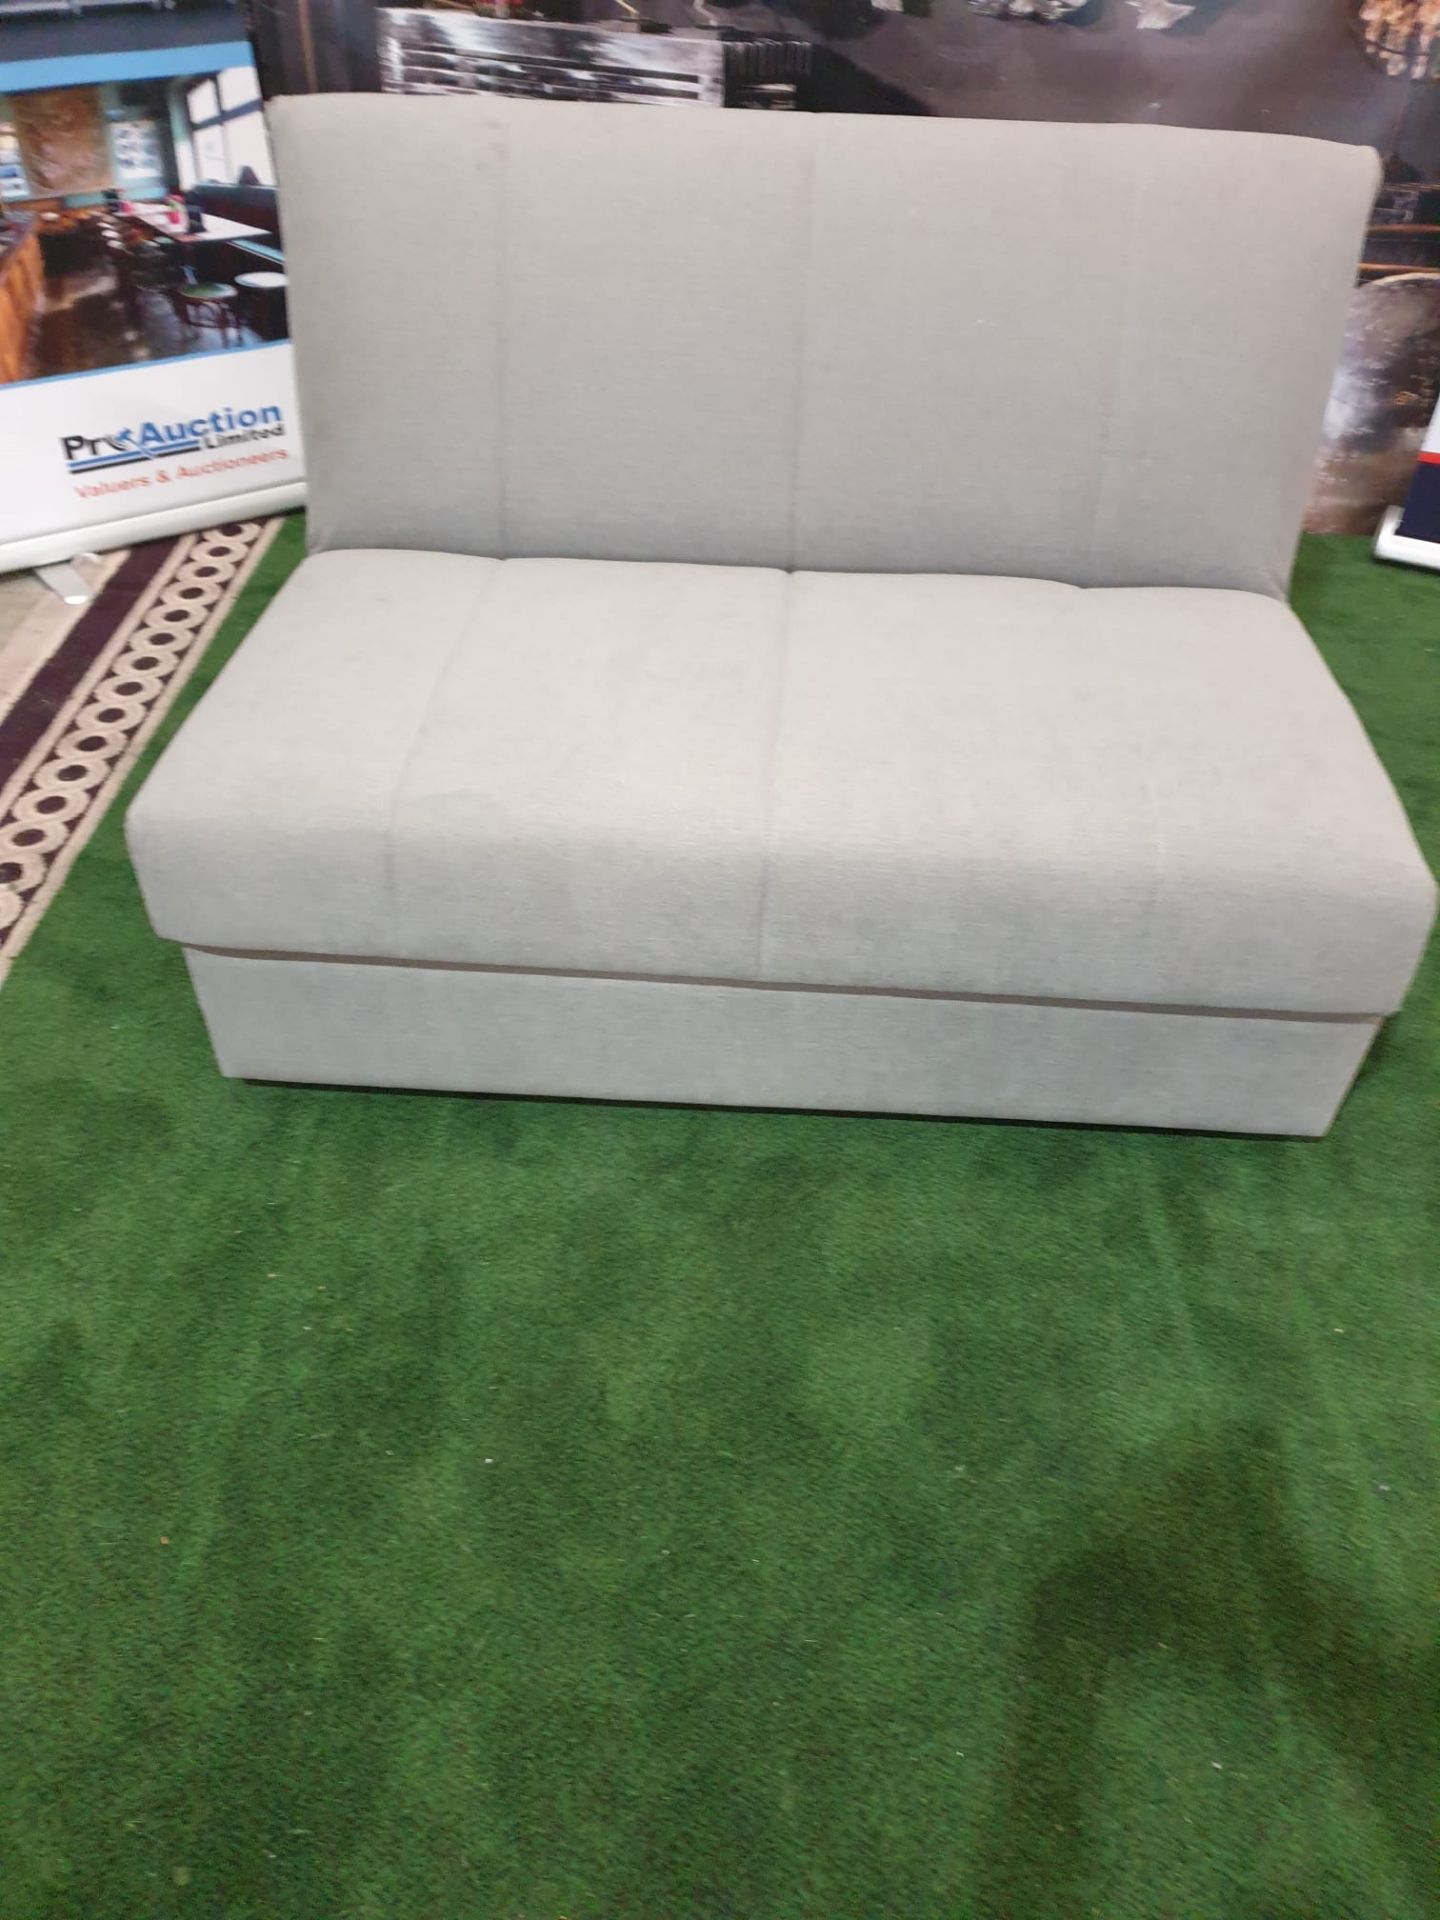 Sofa Bed Dreamworks Metz 120cm Berwick Stone Upholstered Double Sofabed UK made part of the - Image 2 of 2